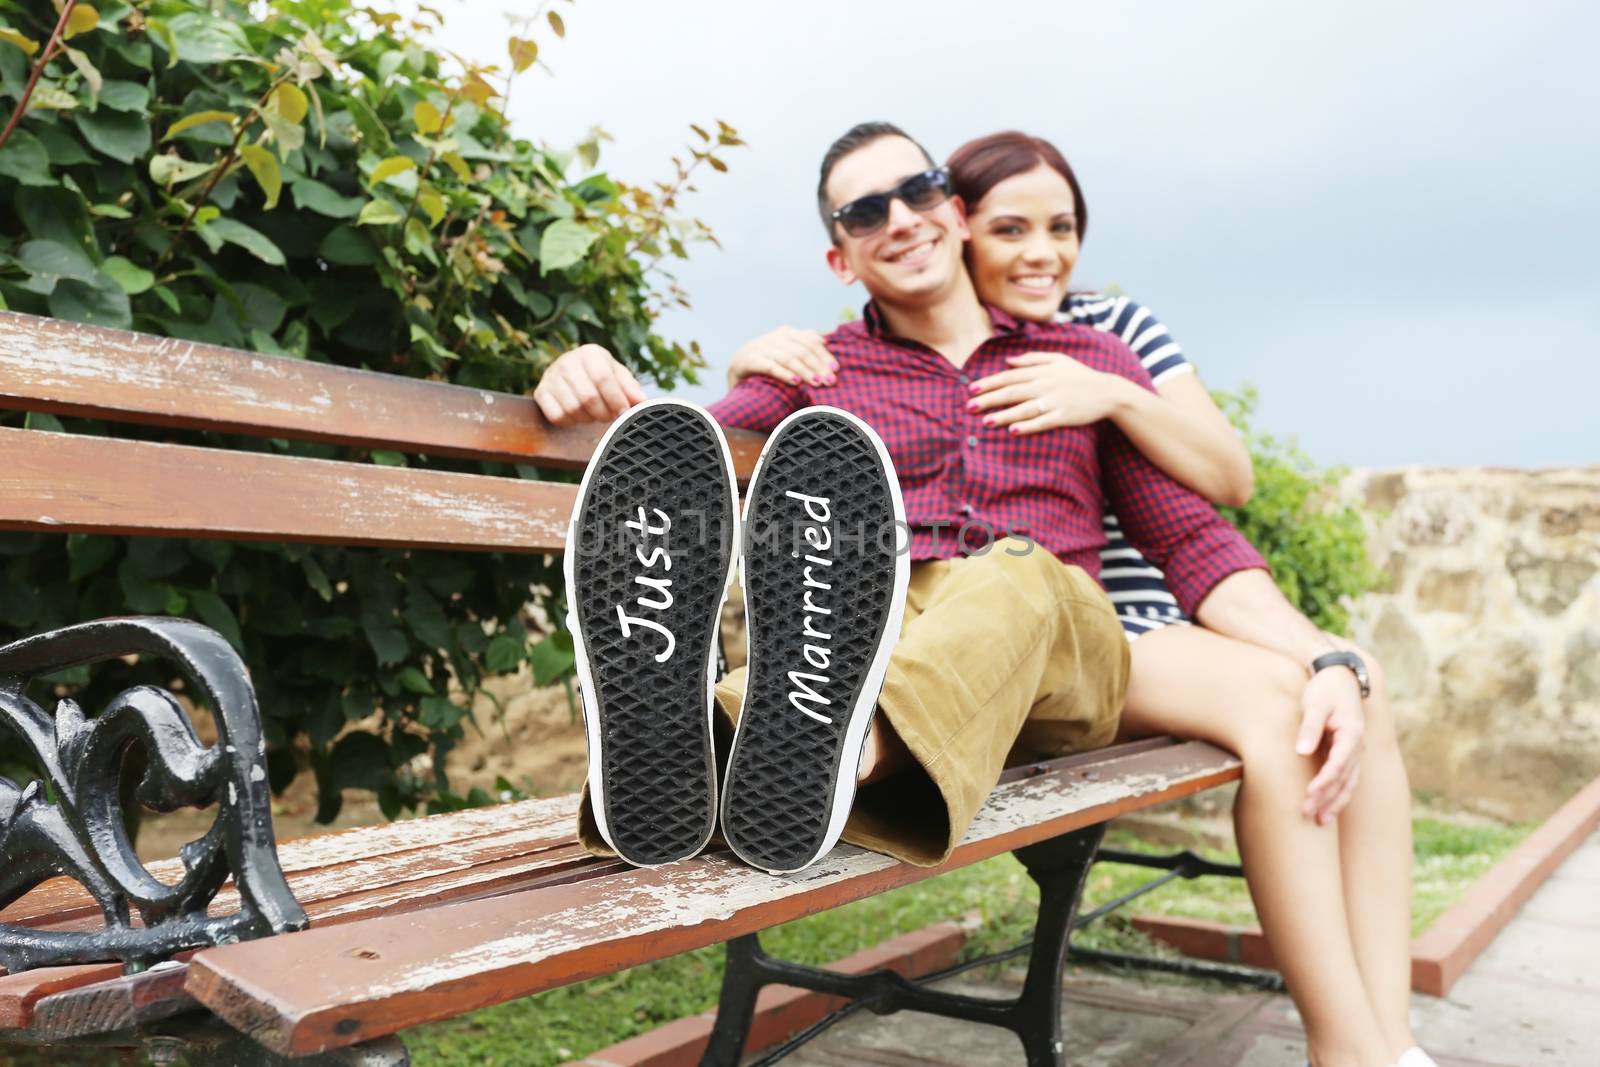 Young beautiful couple with message "Just married" in his shoes. Focus in the shoes.